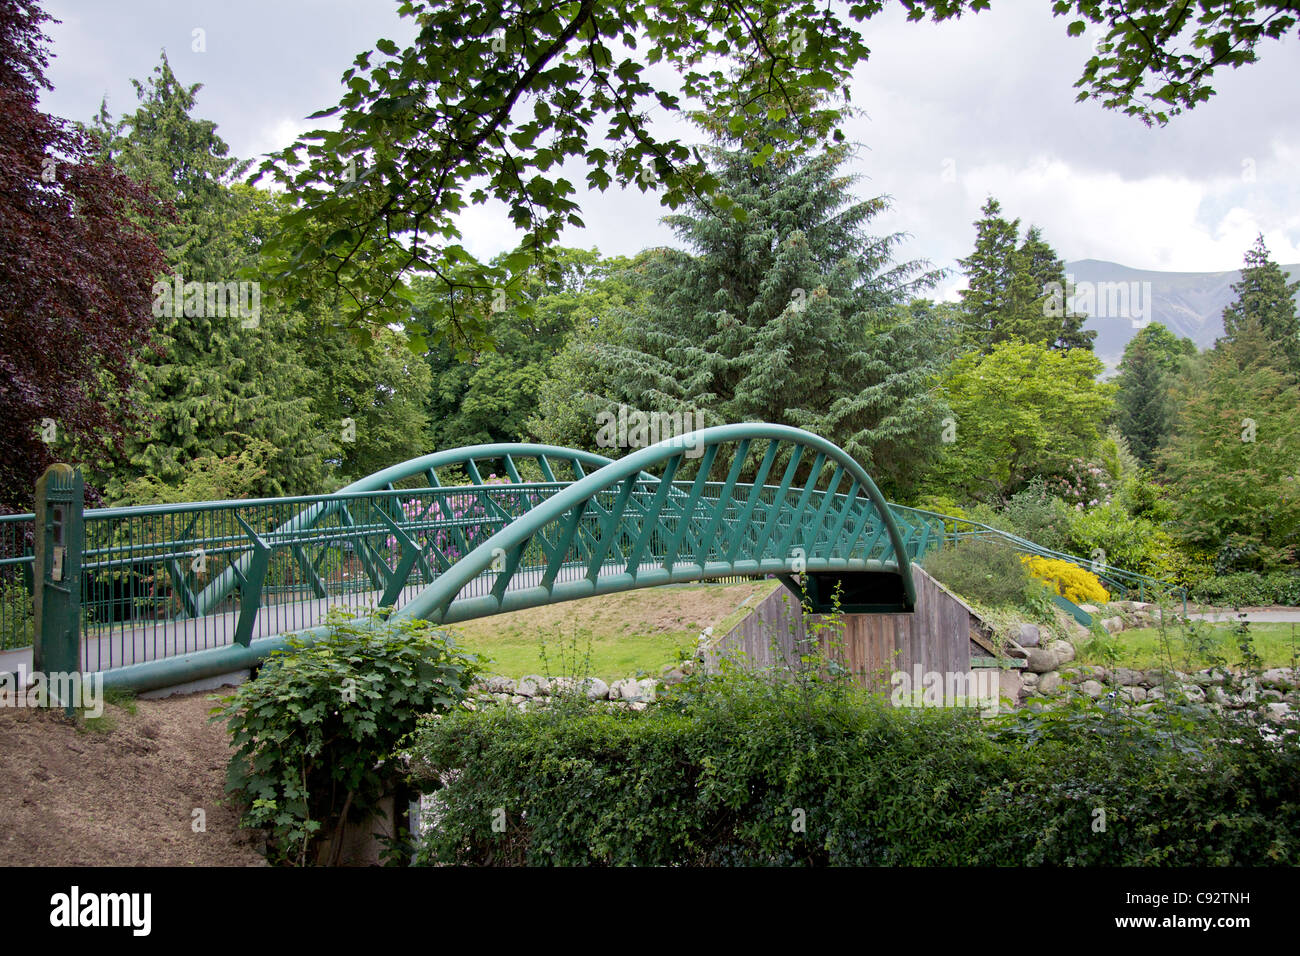 Wivell Bridge in Keswick was built in 2006 replacing the old bridge washed away by the 2005 floods in the Lake District. Stock Photo